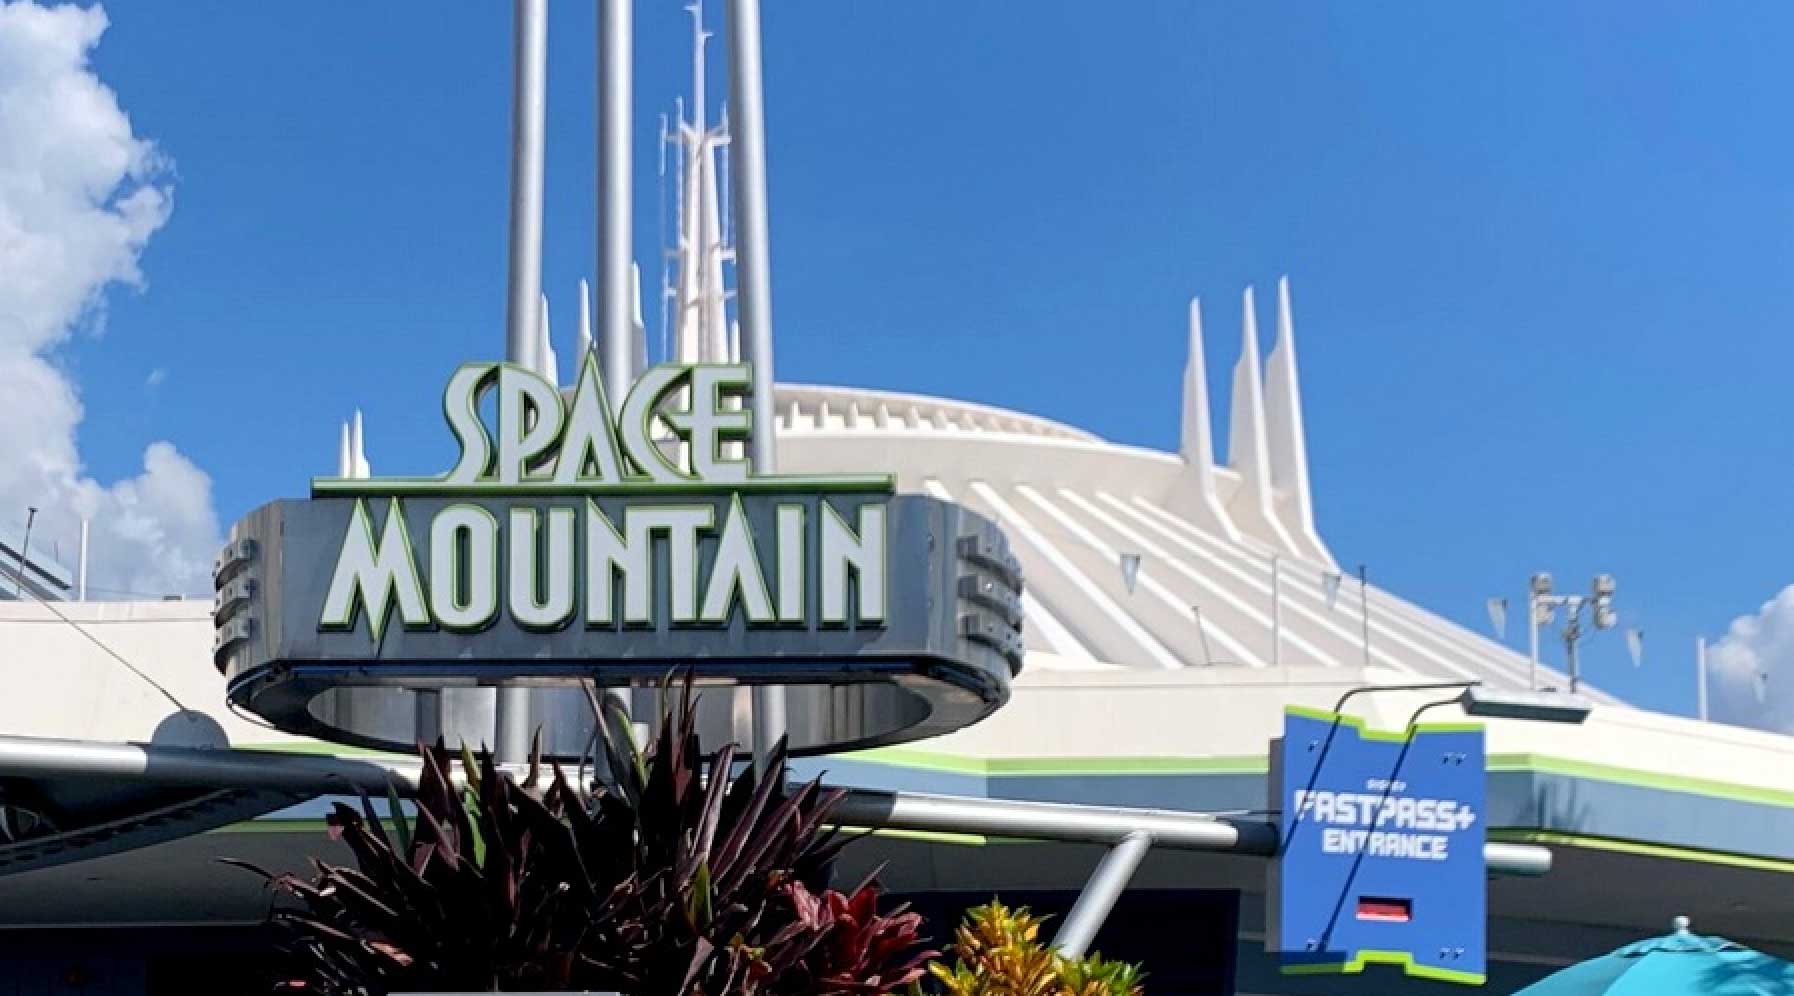 Disney's Space Mountain is going to blast off into the feature film